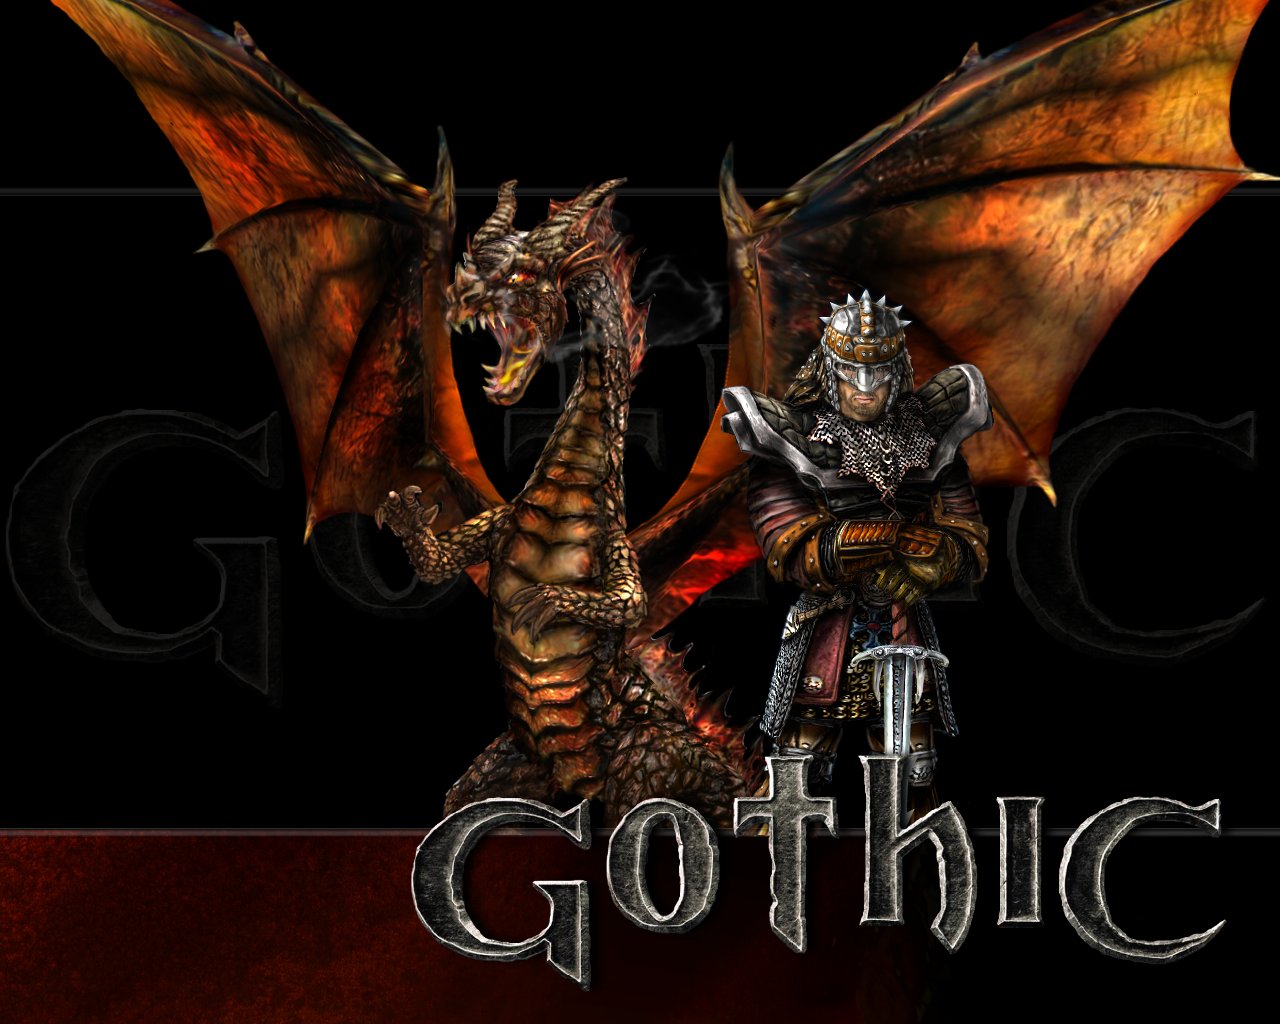 Desktop Wallpapers Gothic vdeo game